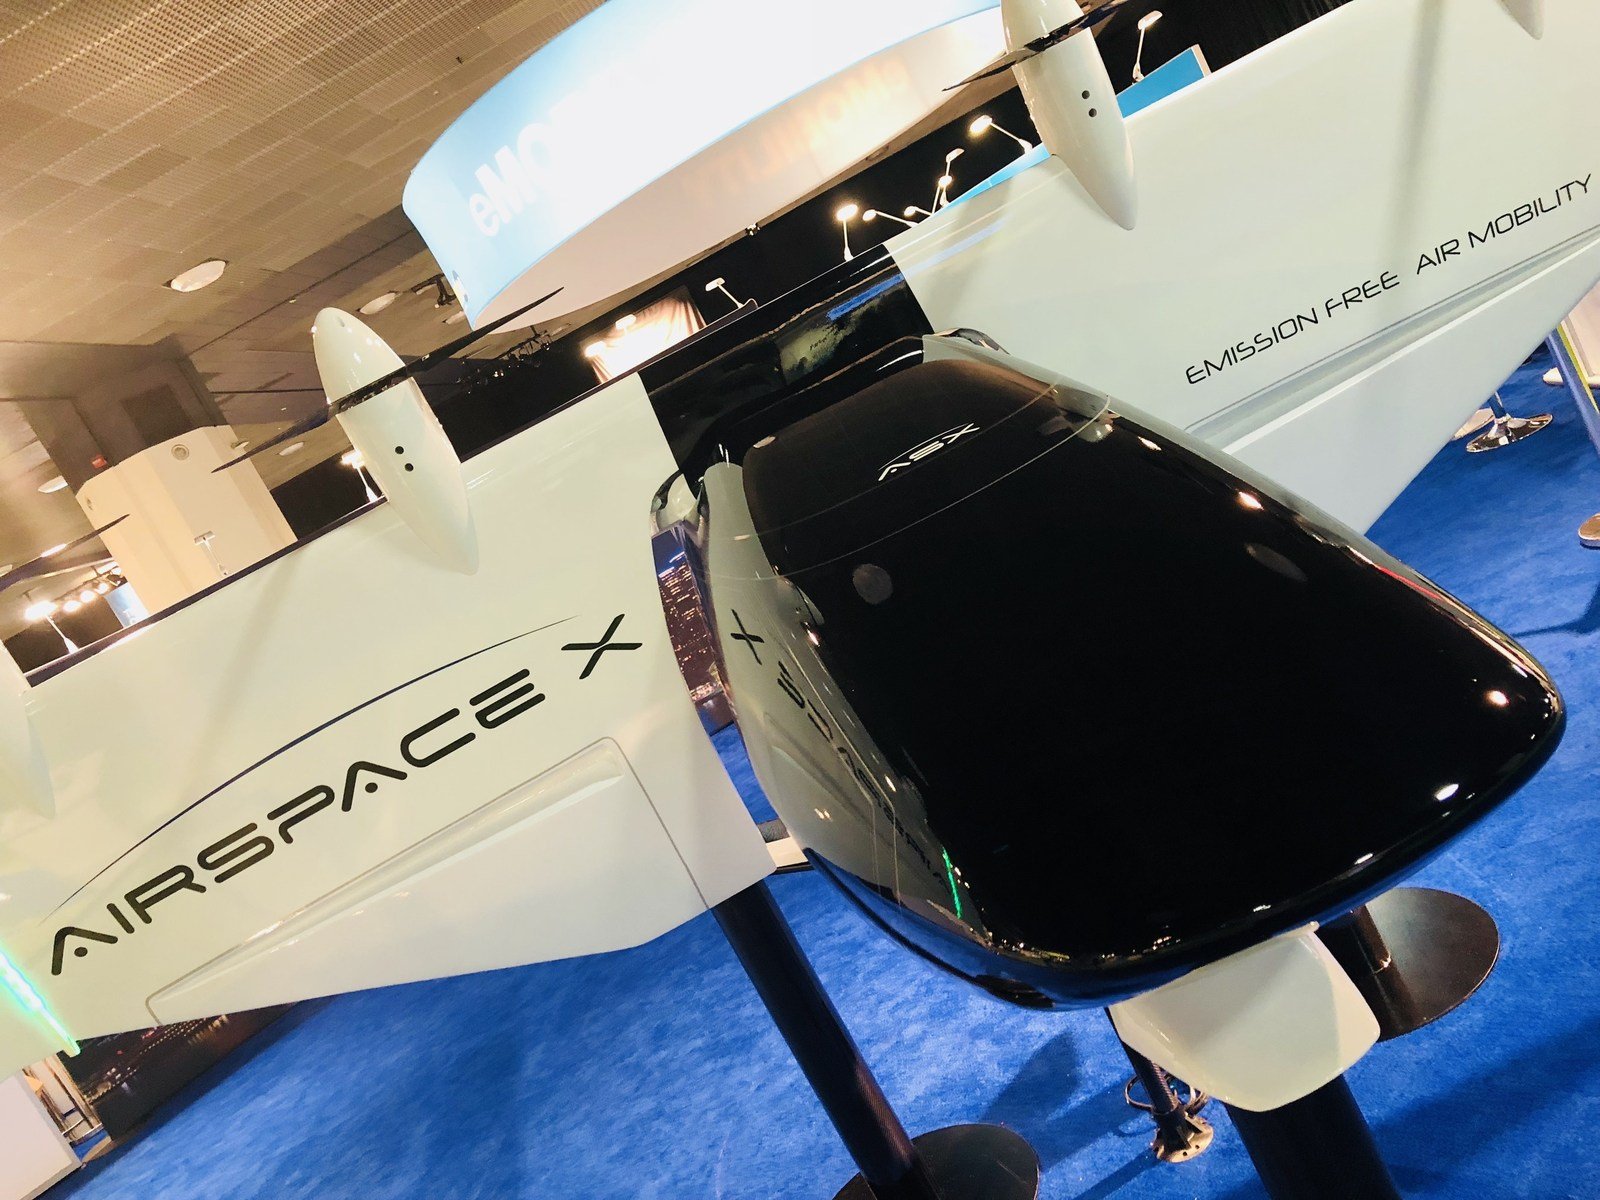 The MOBi-ONE electric vertical take-off and landing (eVTOL) aircraft was revealed at the North American International Auto Show (NAIAS) in Detroit. Source: AirSpaceX